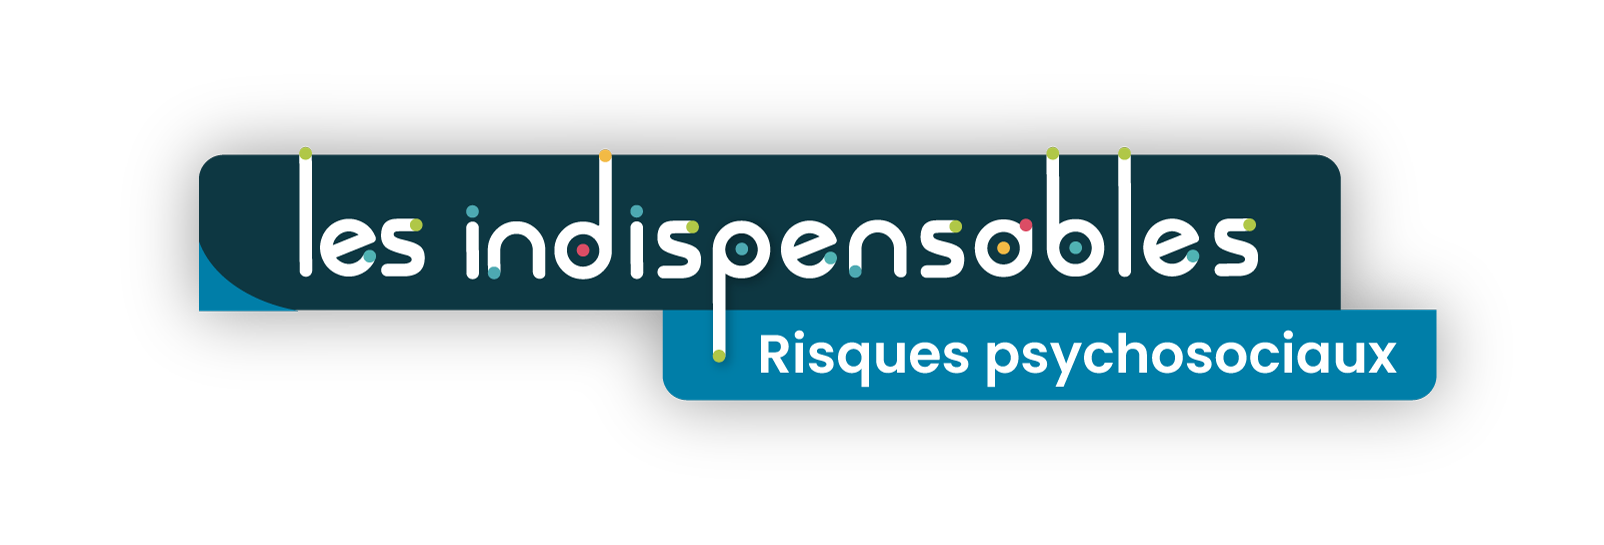 LOGO-RPS-INDISPENSABLE-COUL